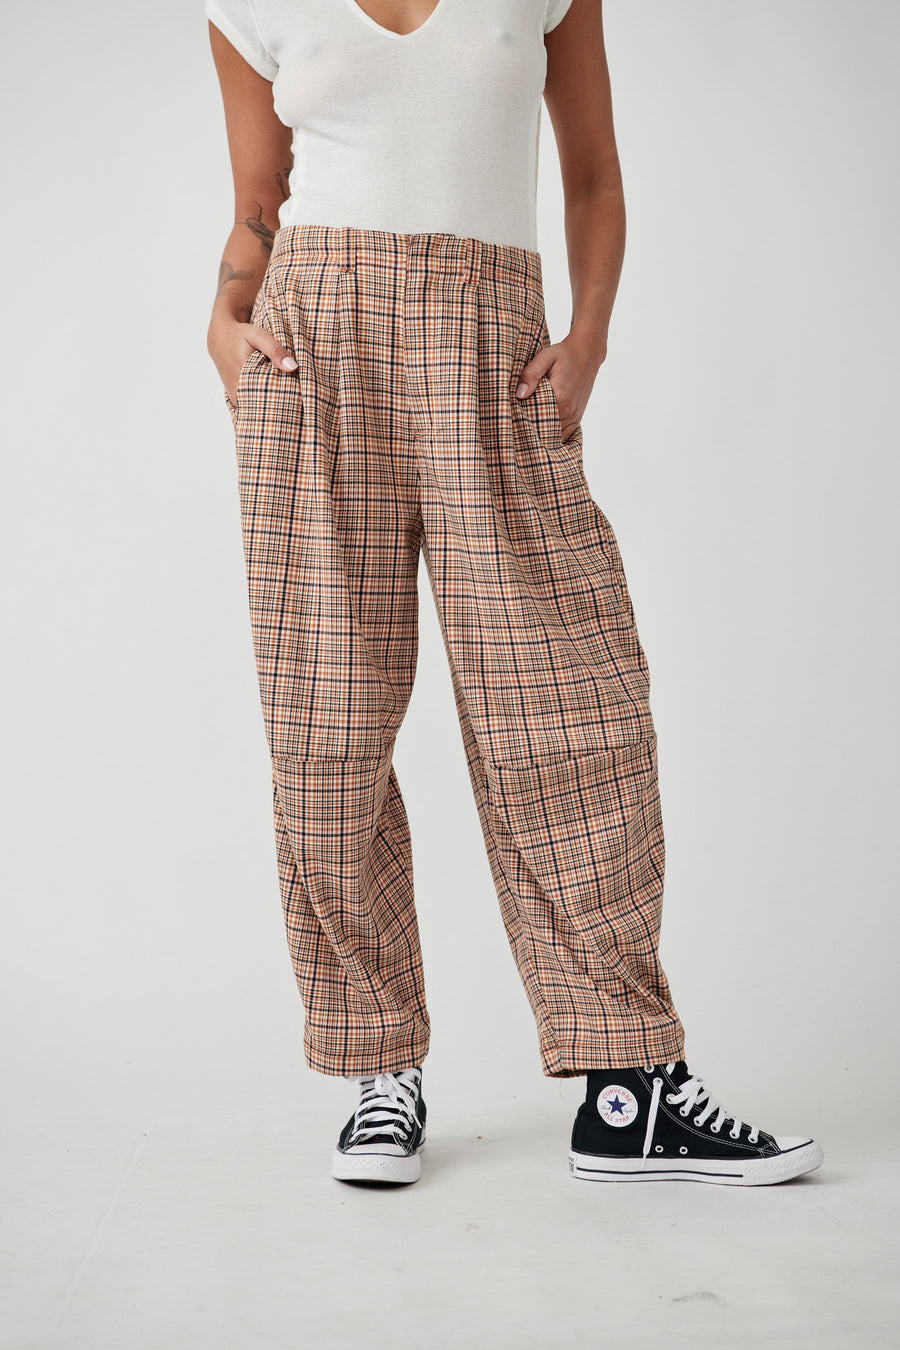 Free People Turning Point Trouser - Neutral Combo